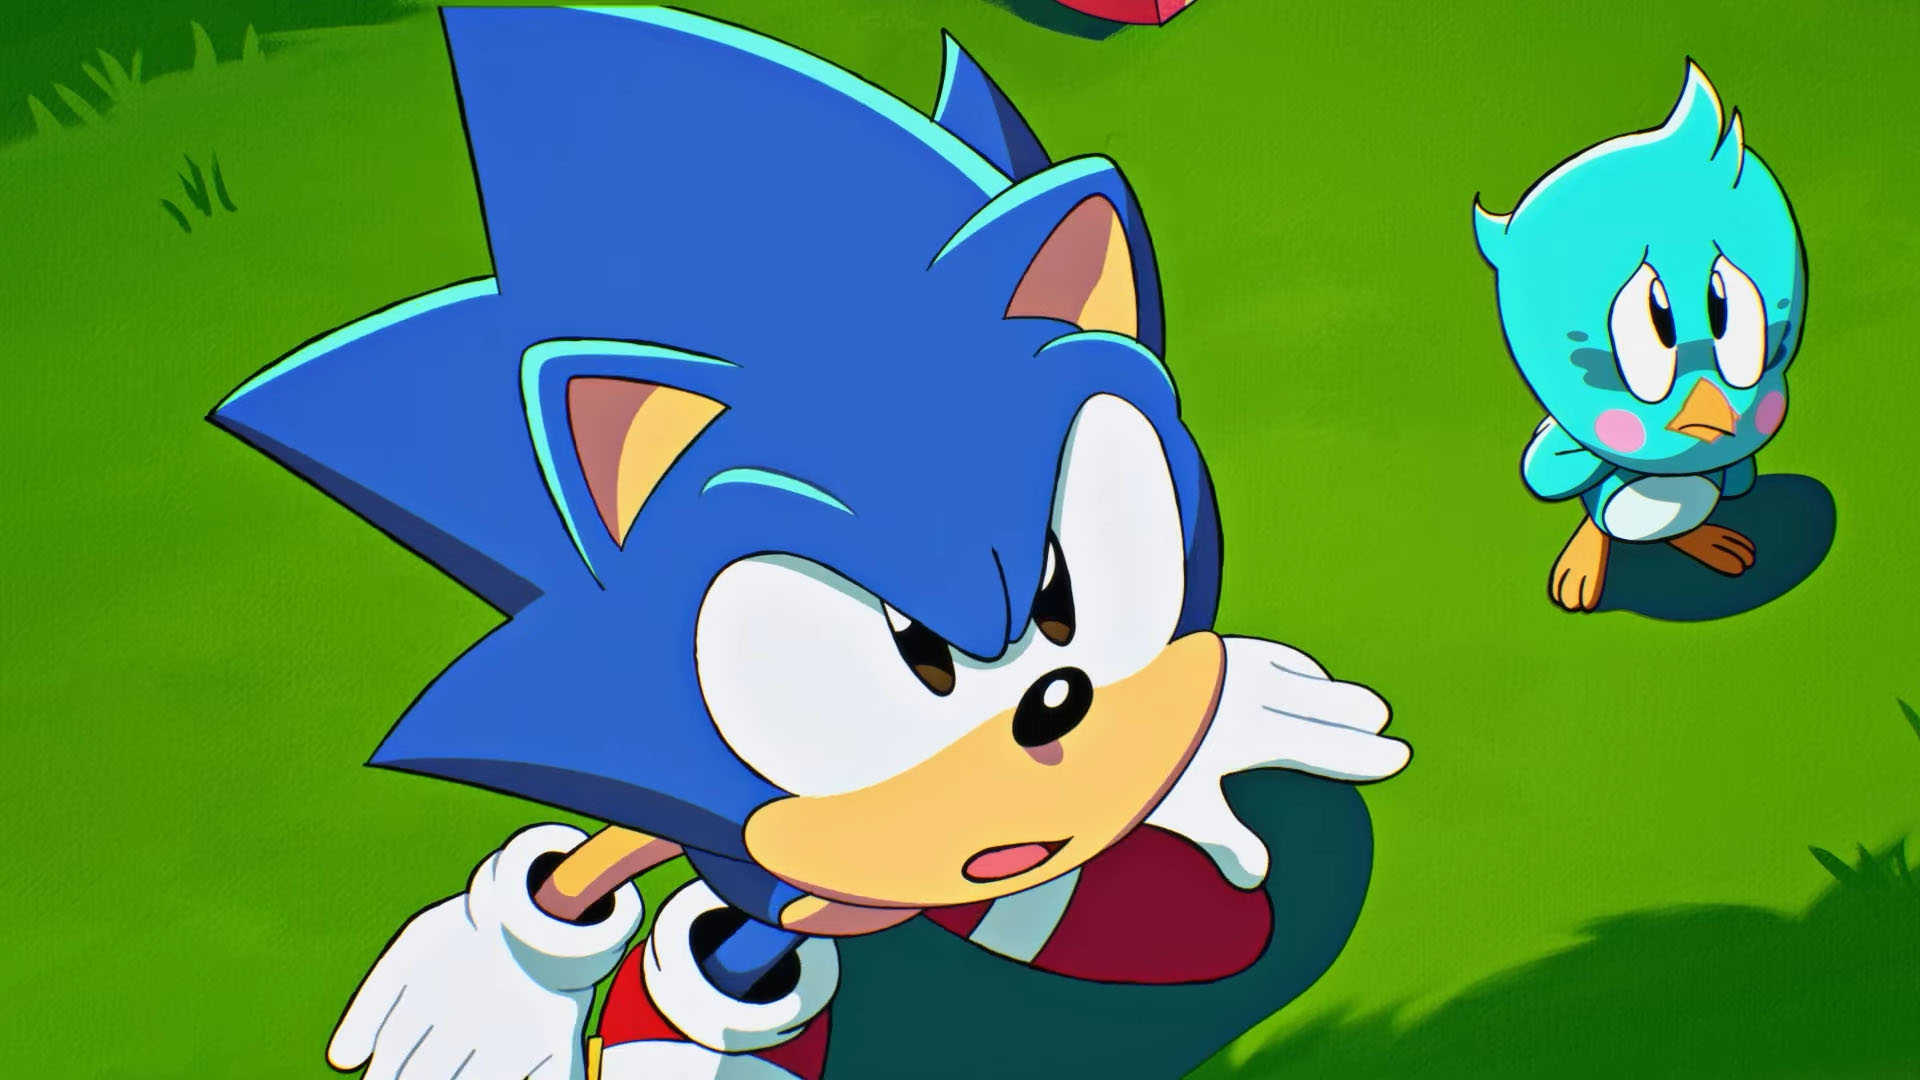 10 Best Playable Sonic Characters, Ranked